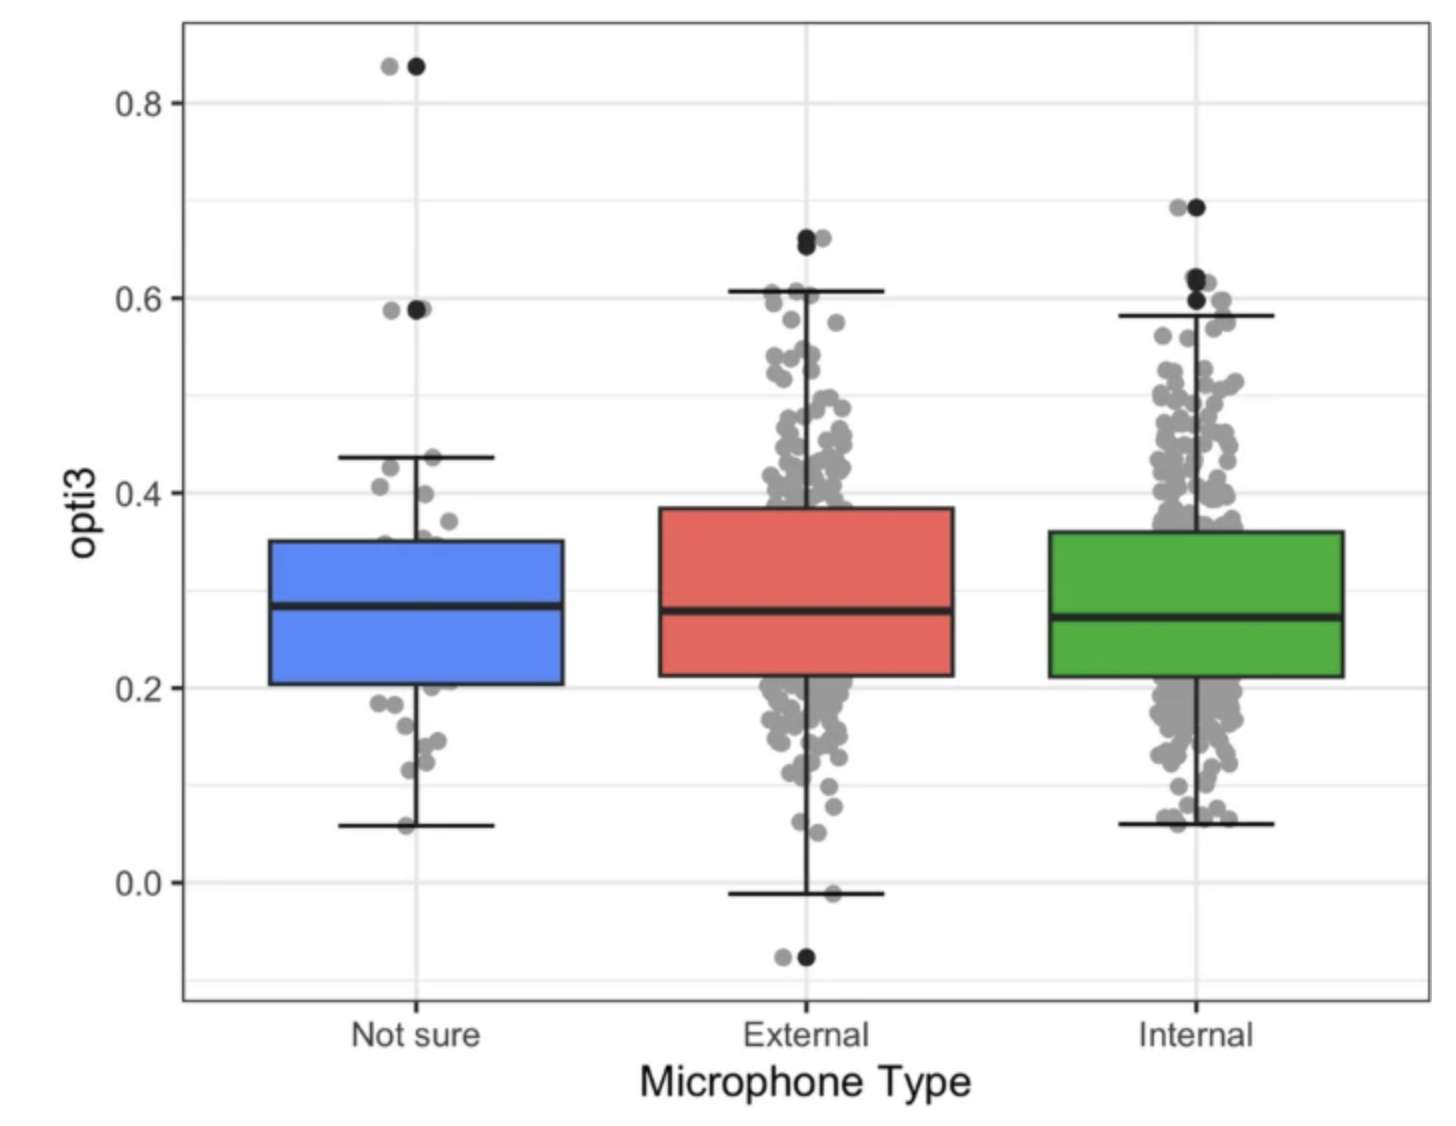 Boxplot, dot plot and SEM plot of opti3 for self-reported microphone type